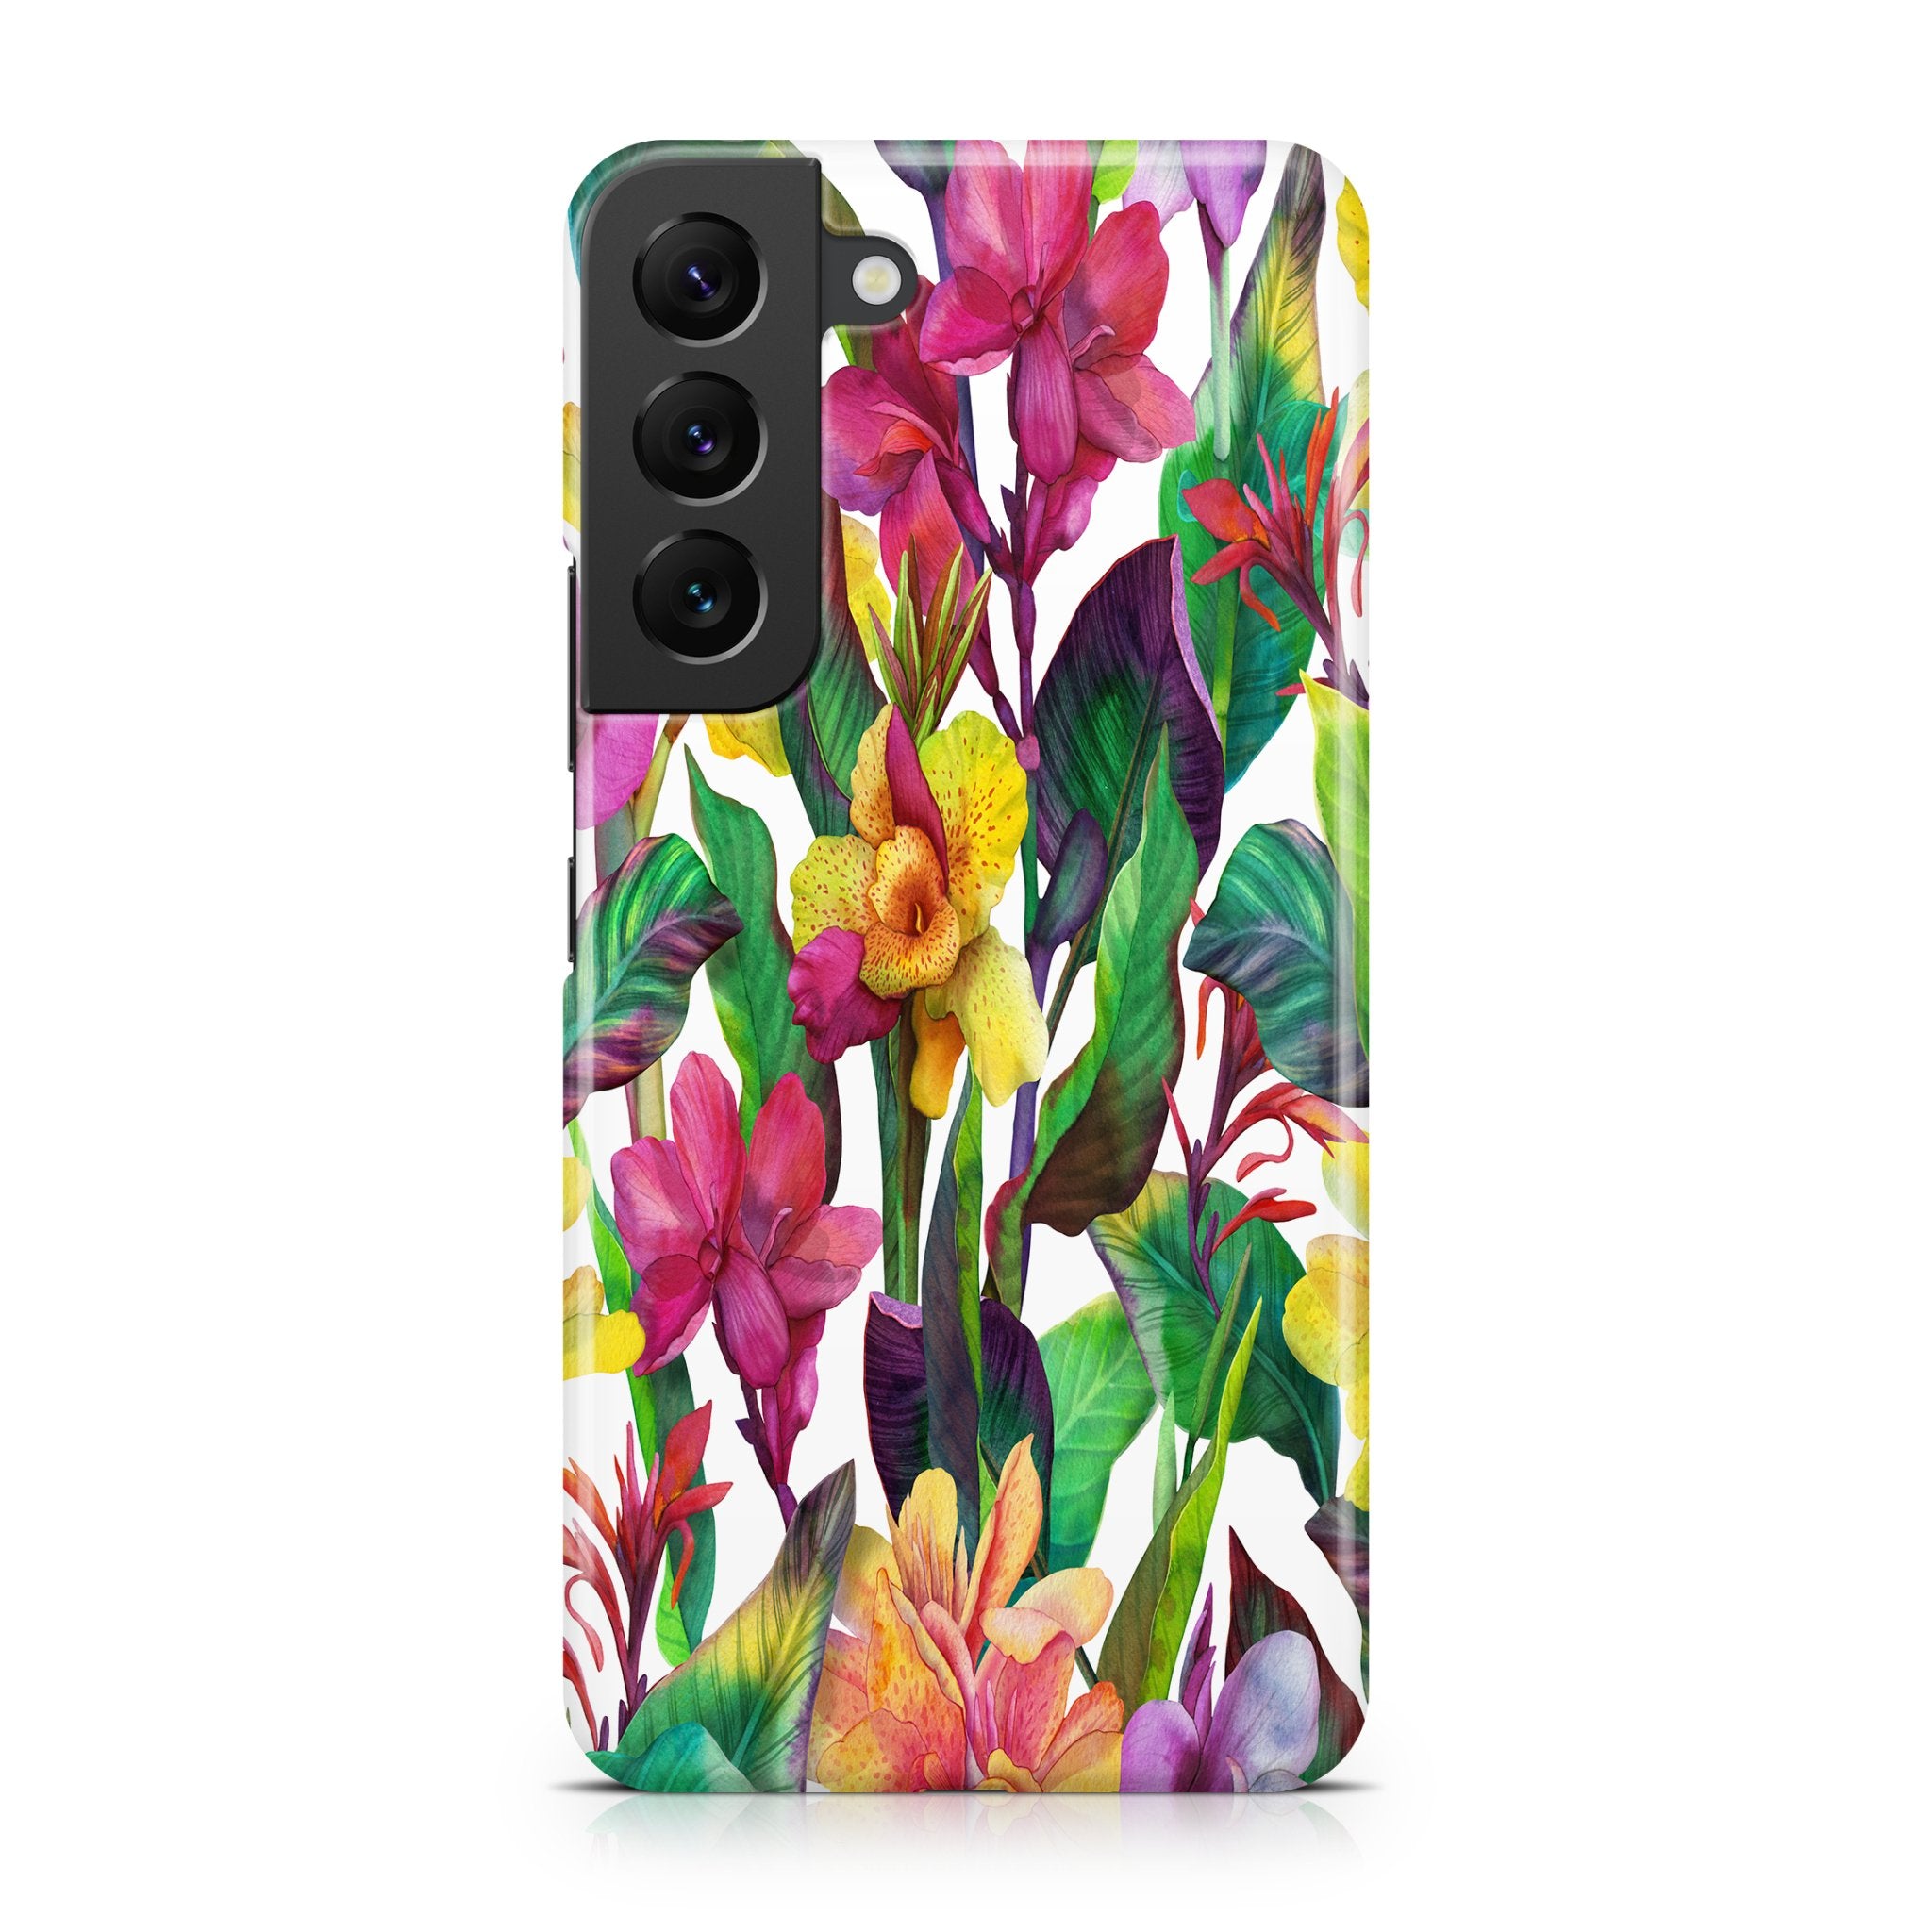 Canna Lily - Samsung phone case designs by CaseSwagger